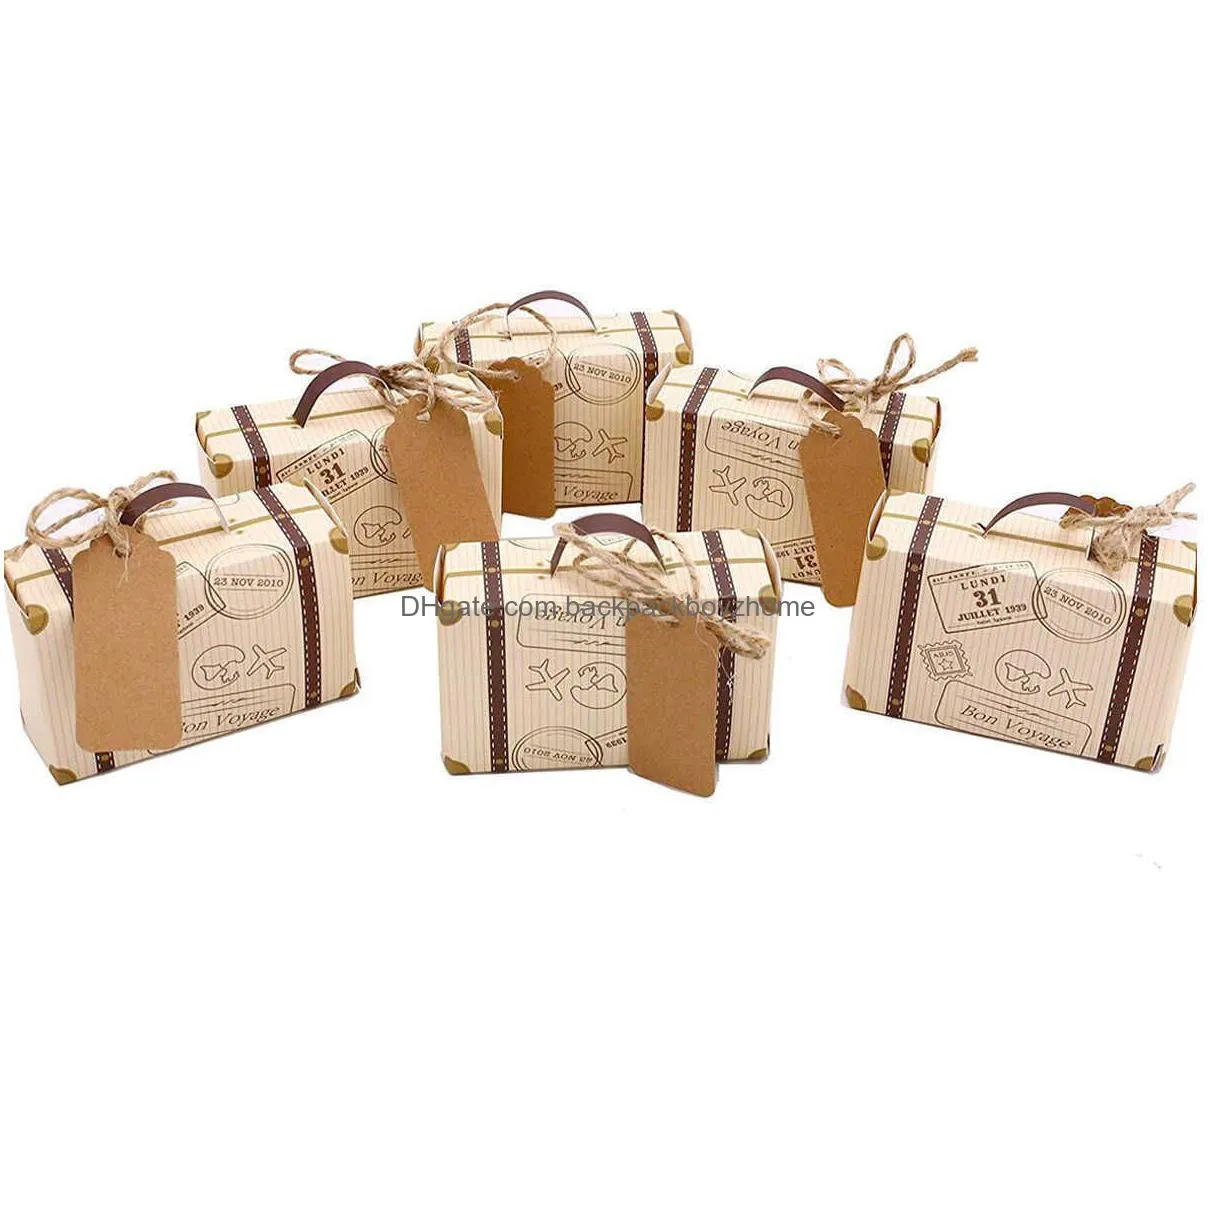 new 50 piece mini suitcase gift box party gift candy box with label vintage kraft paper and hemp rope for wedding party decorations